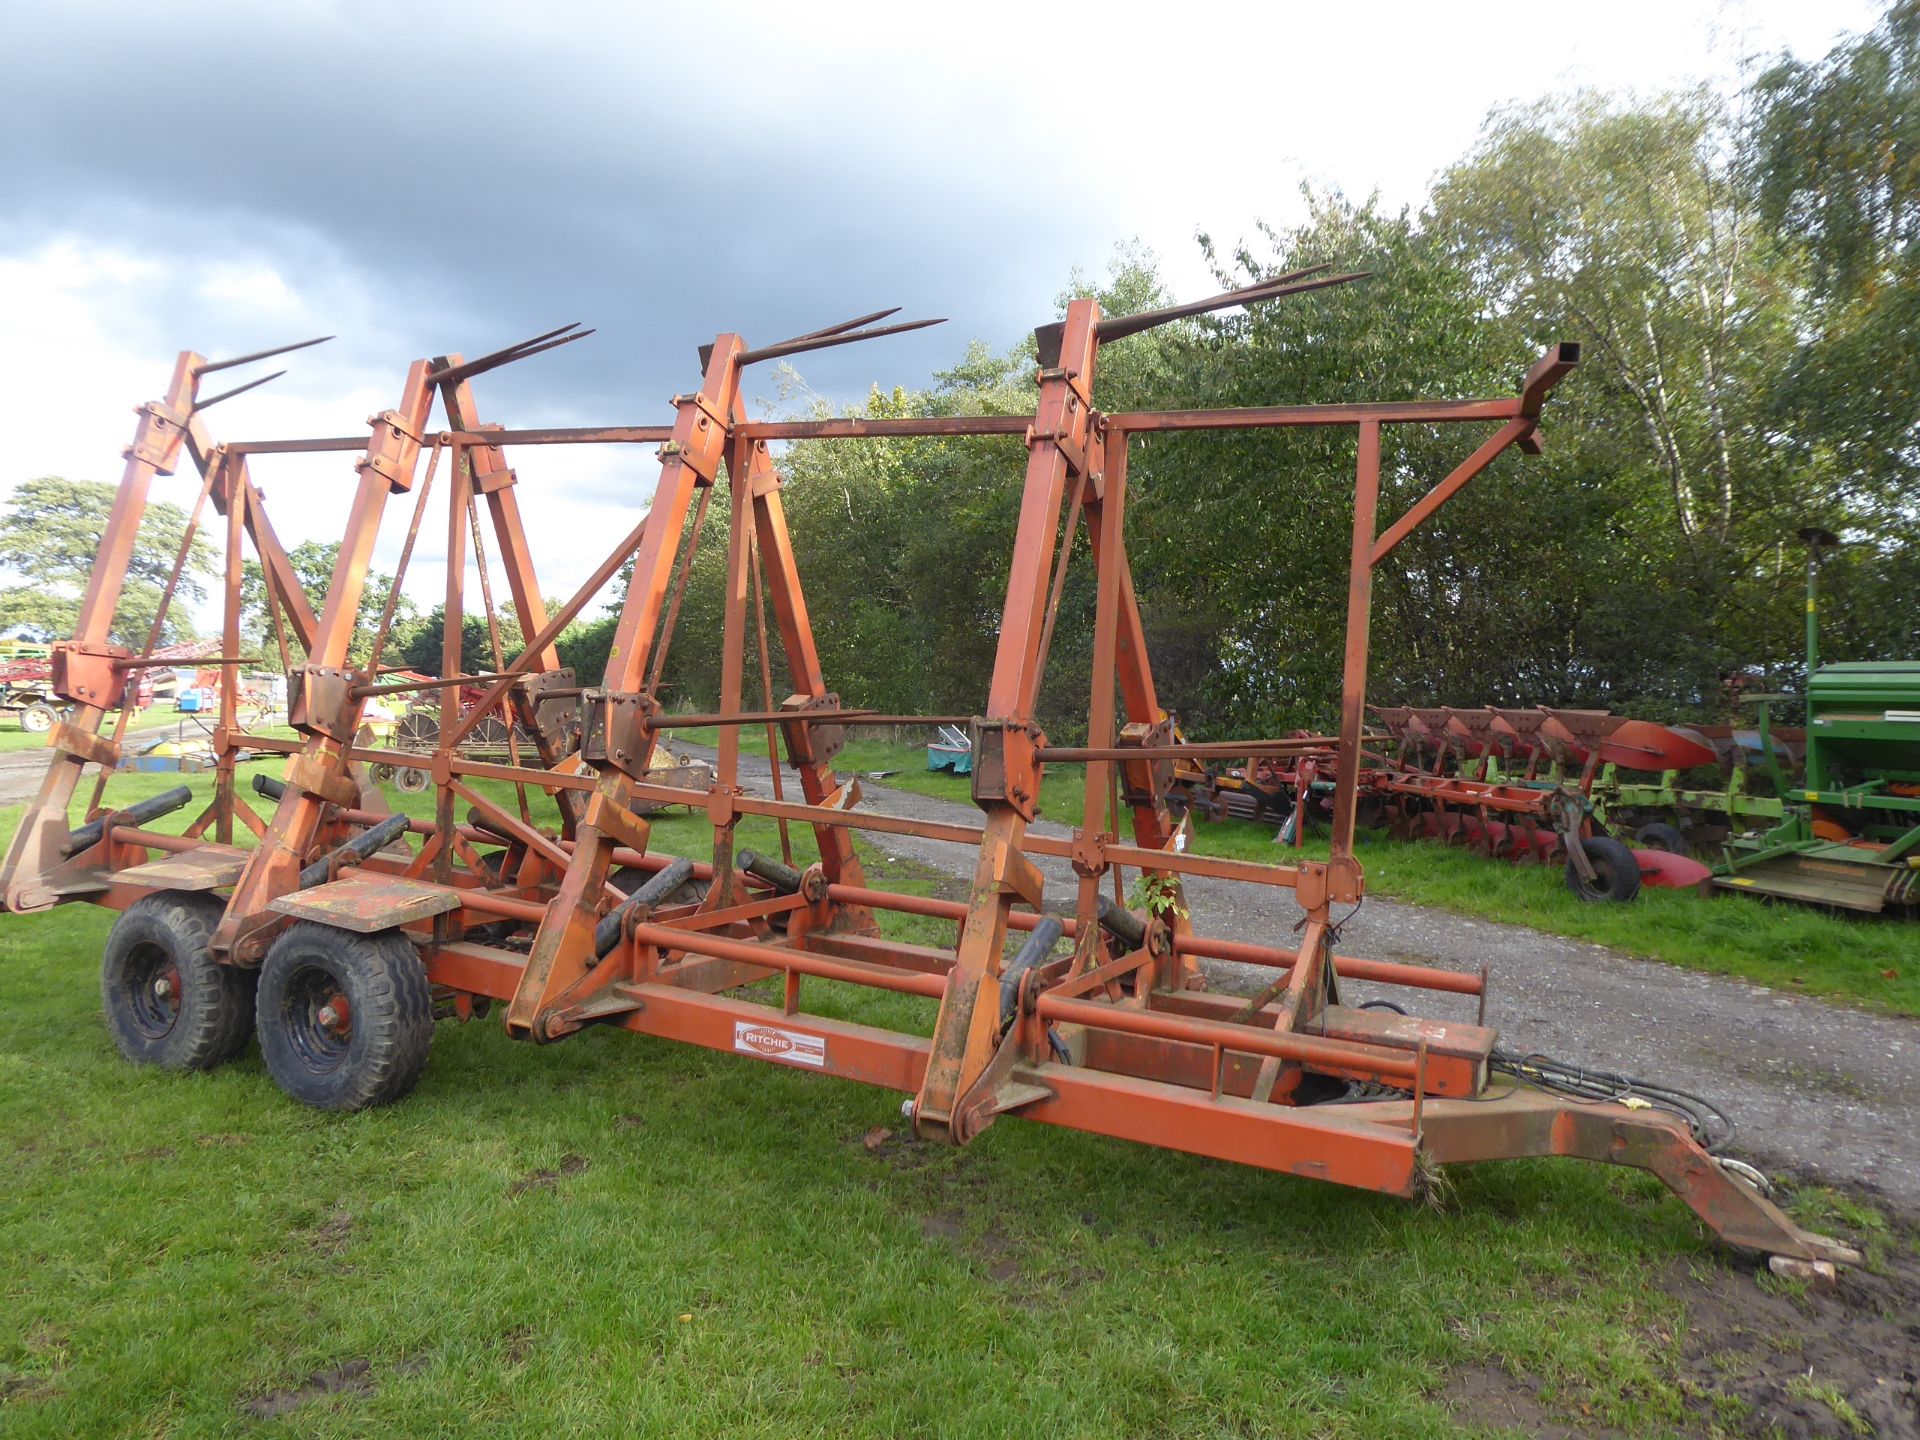 Ritchie bale trailer, takes 16 round or 8 big square